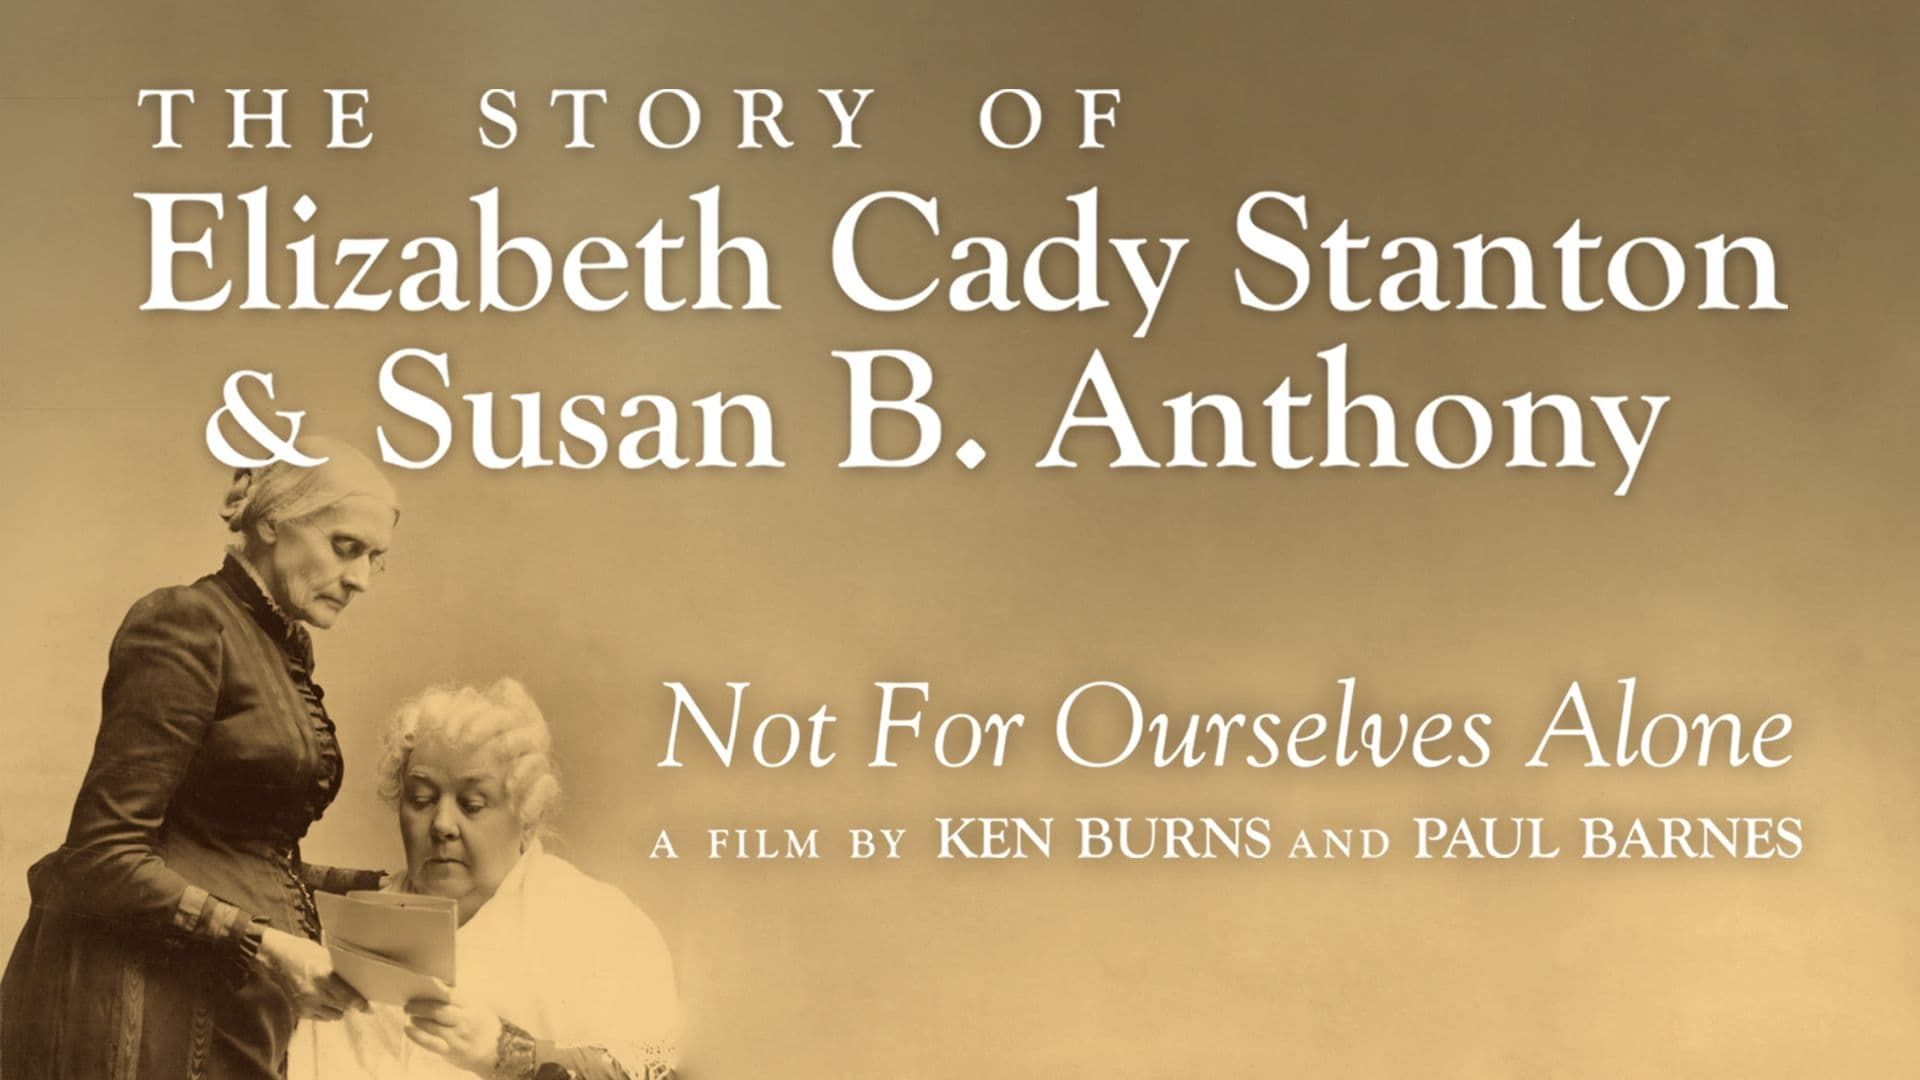 Not for Ourselves Alone: The Story of Elizabeth Cady Stanton & Susan B. Anthony background